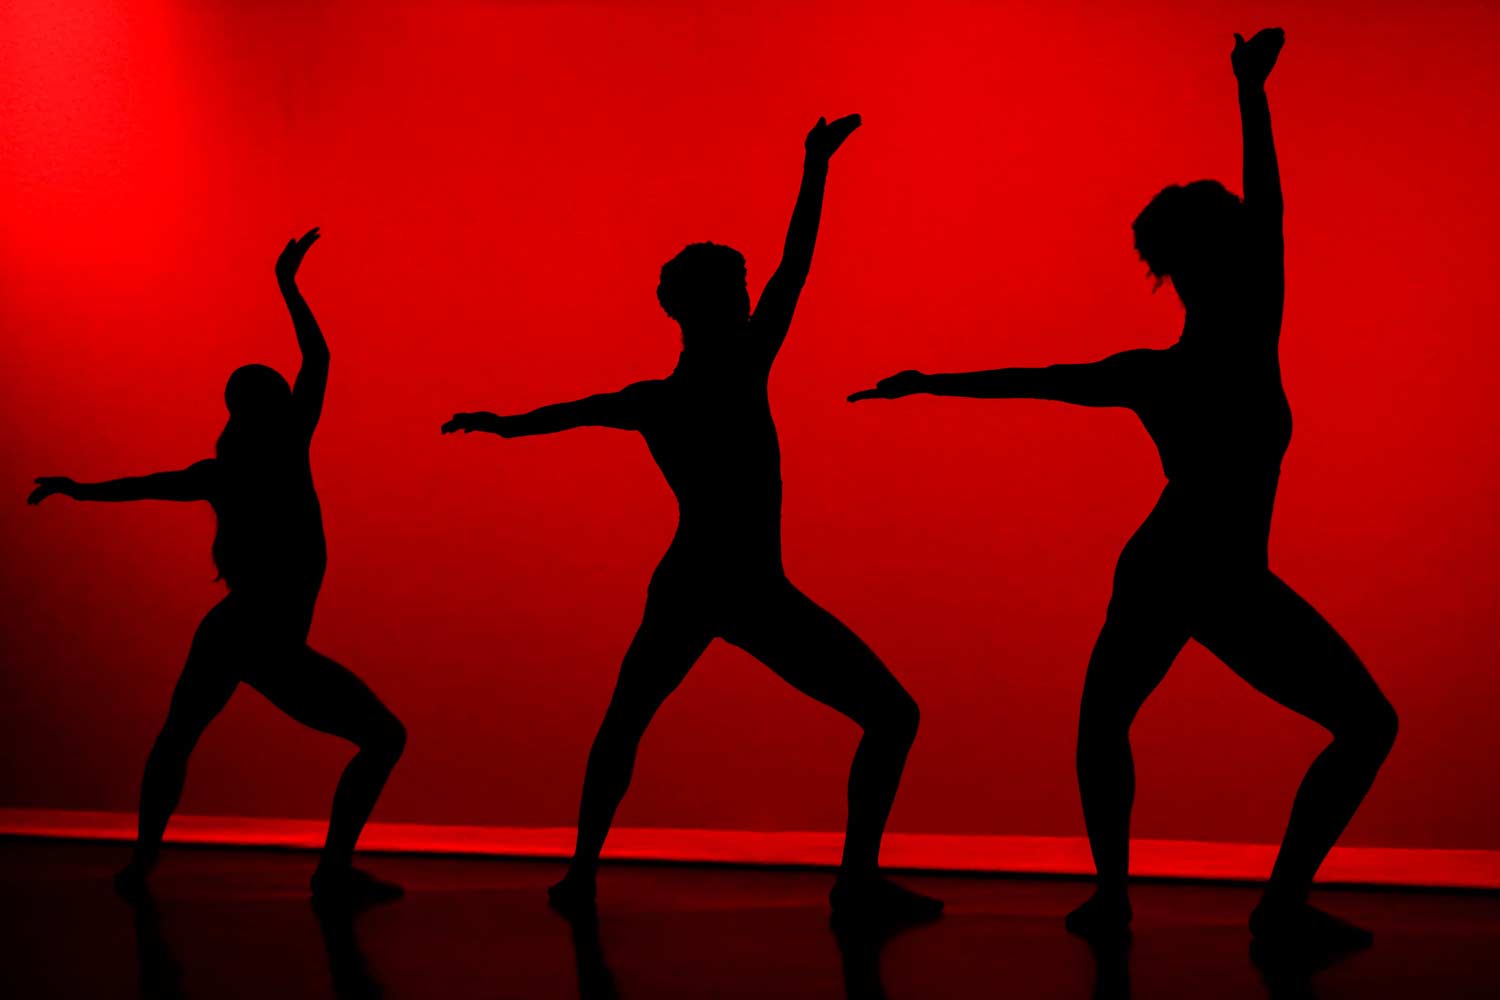 The silhouttes of three dancers on stage in front of a red background.